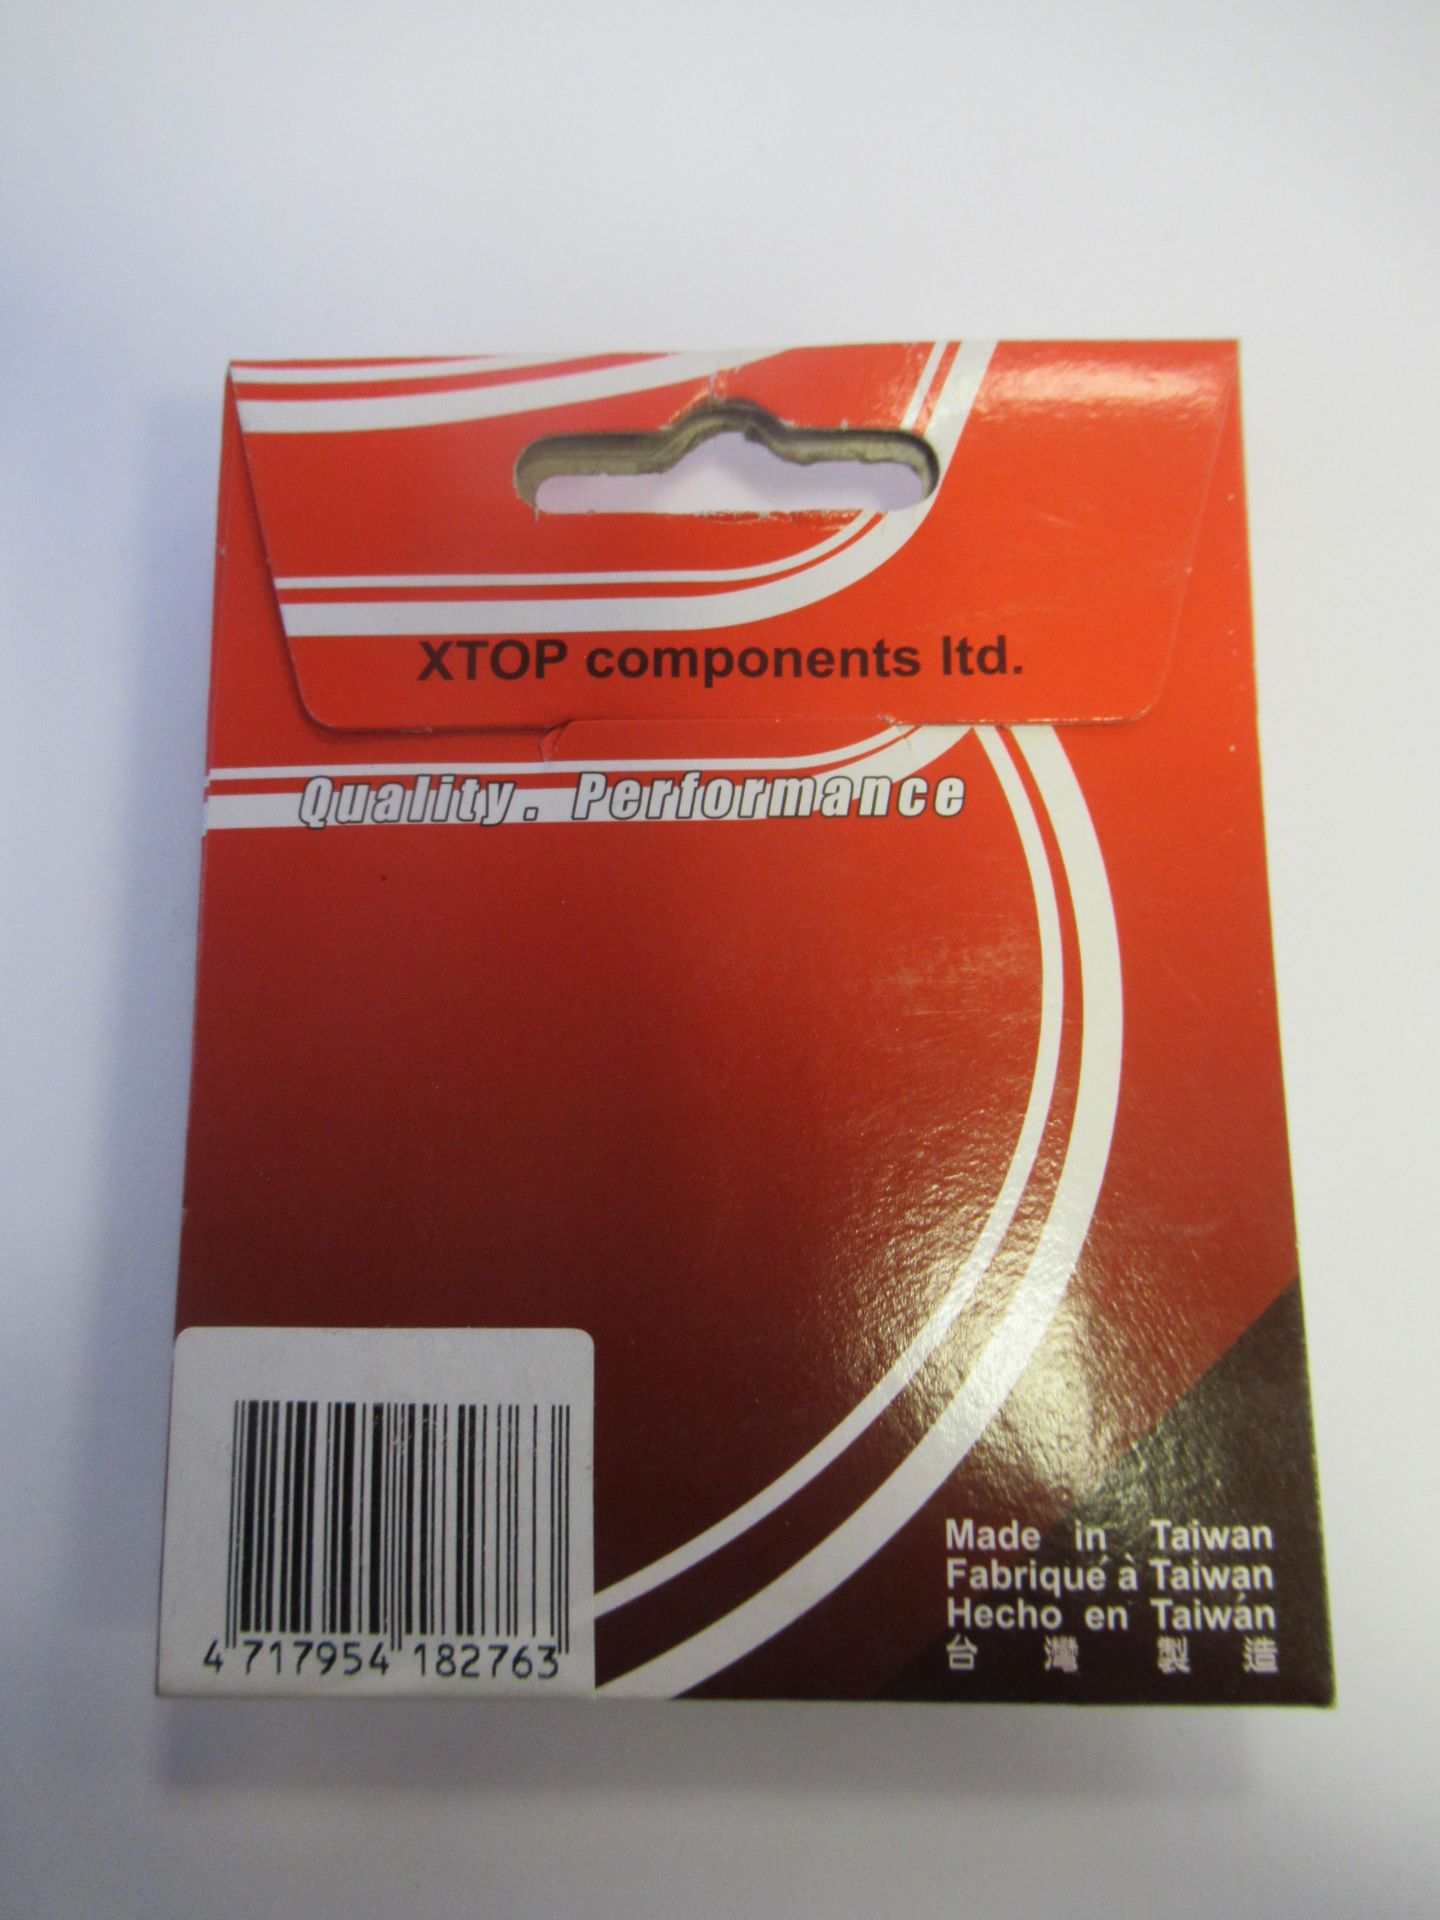 Bicycle parts to include XTOP performance Components, 2x XP-160, RRP £7.95 each and 3x XP-581, RRP £ - Image 11 of 35